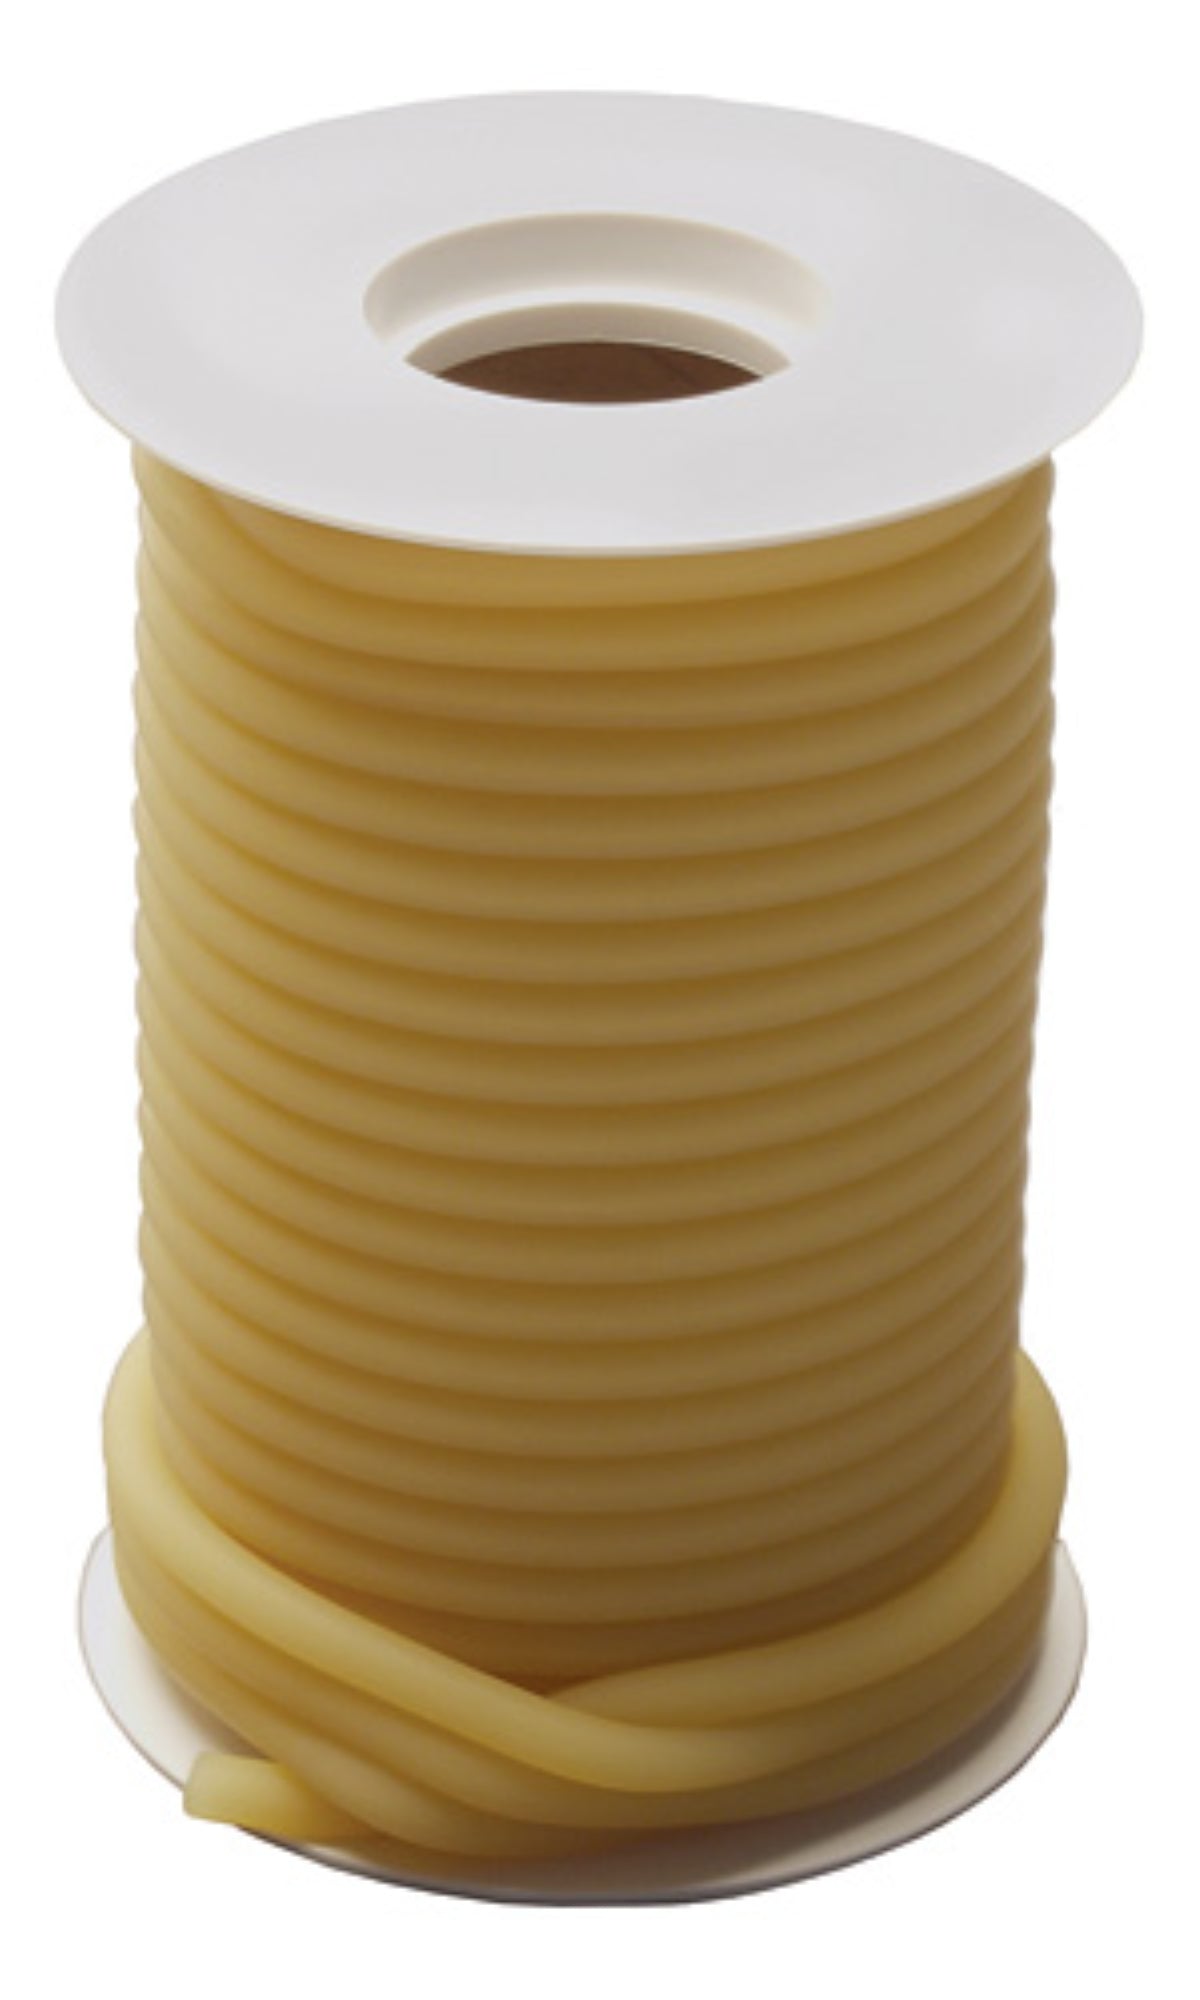 Smooth Amber Rubber Latex Tubing 50 Foot Roll